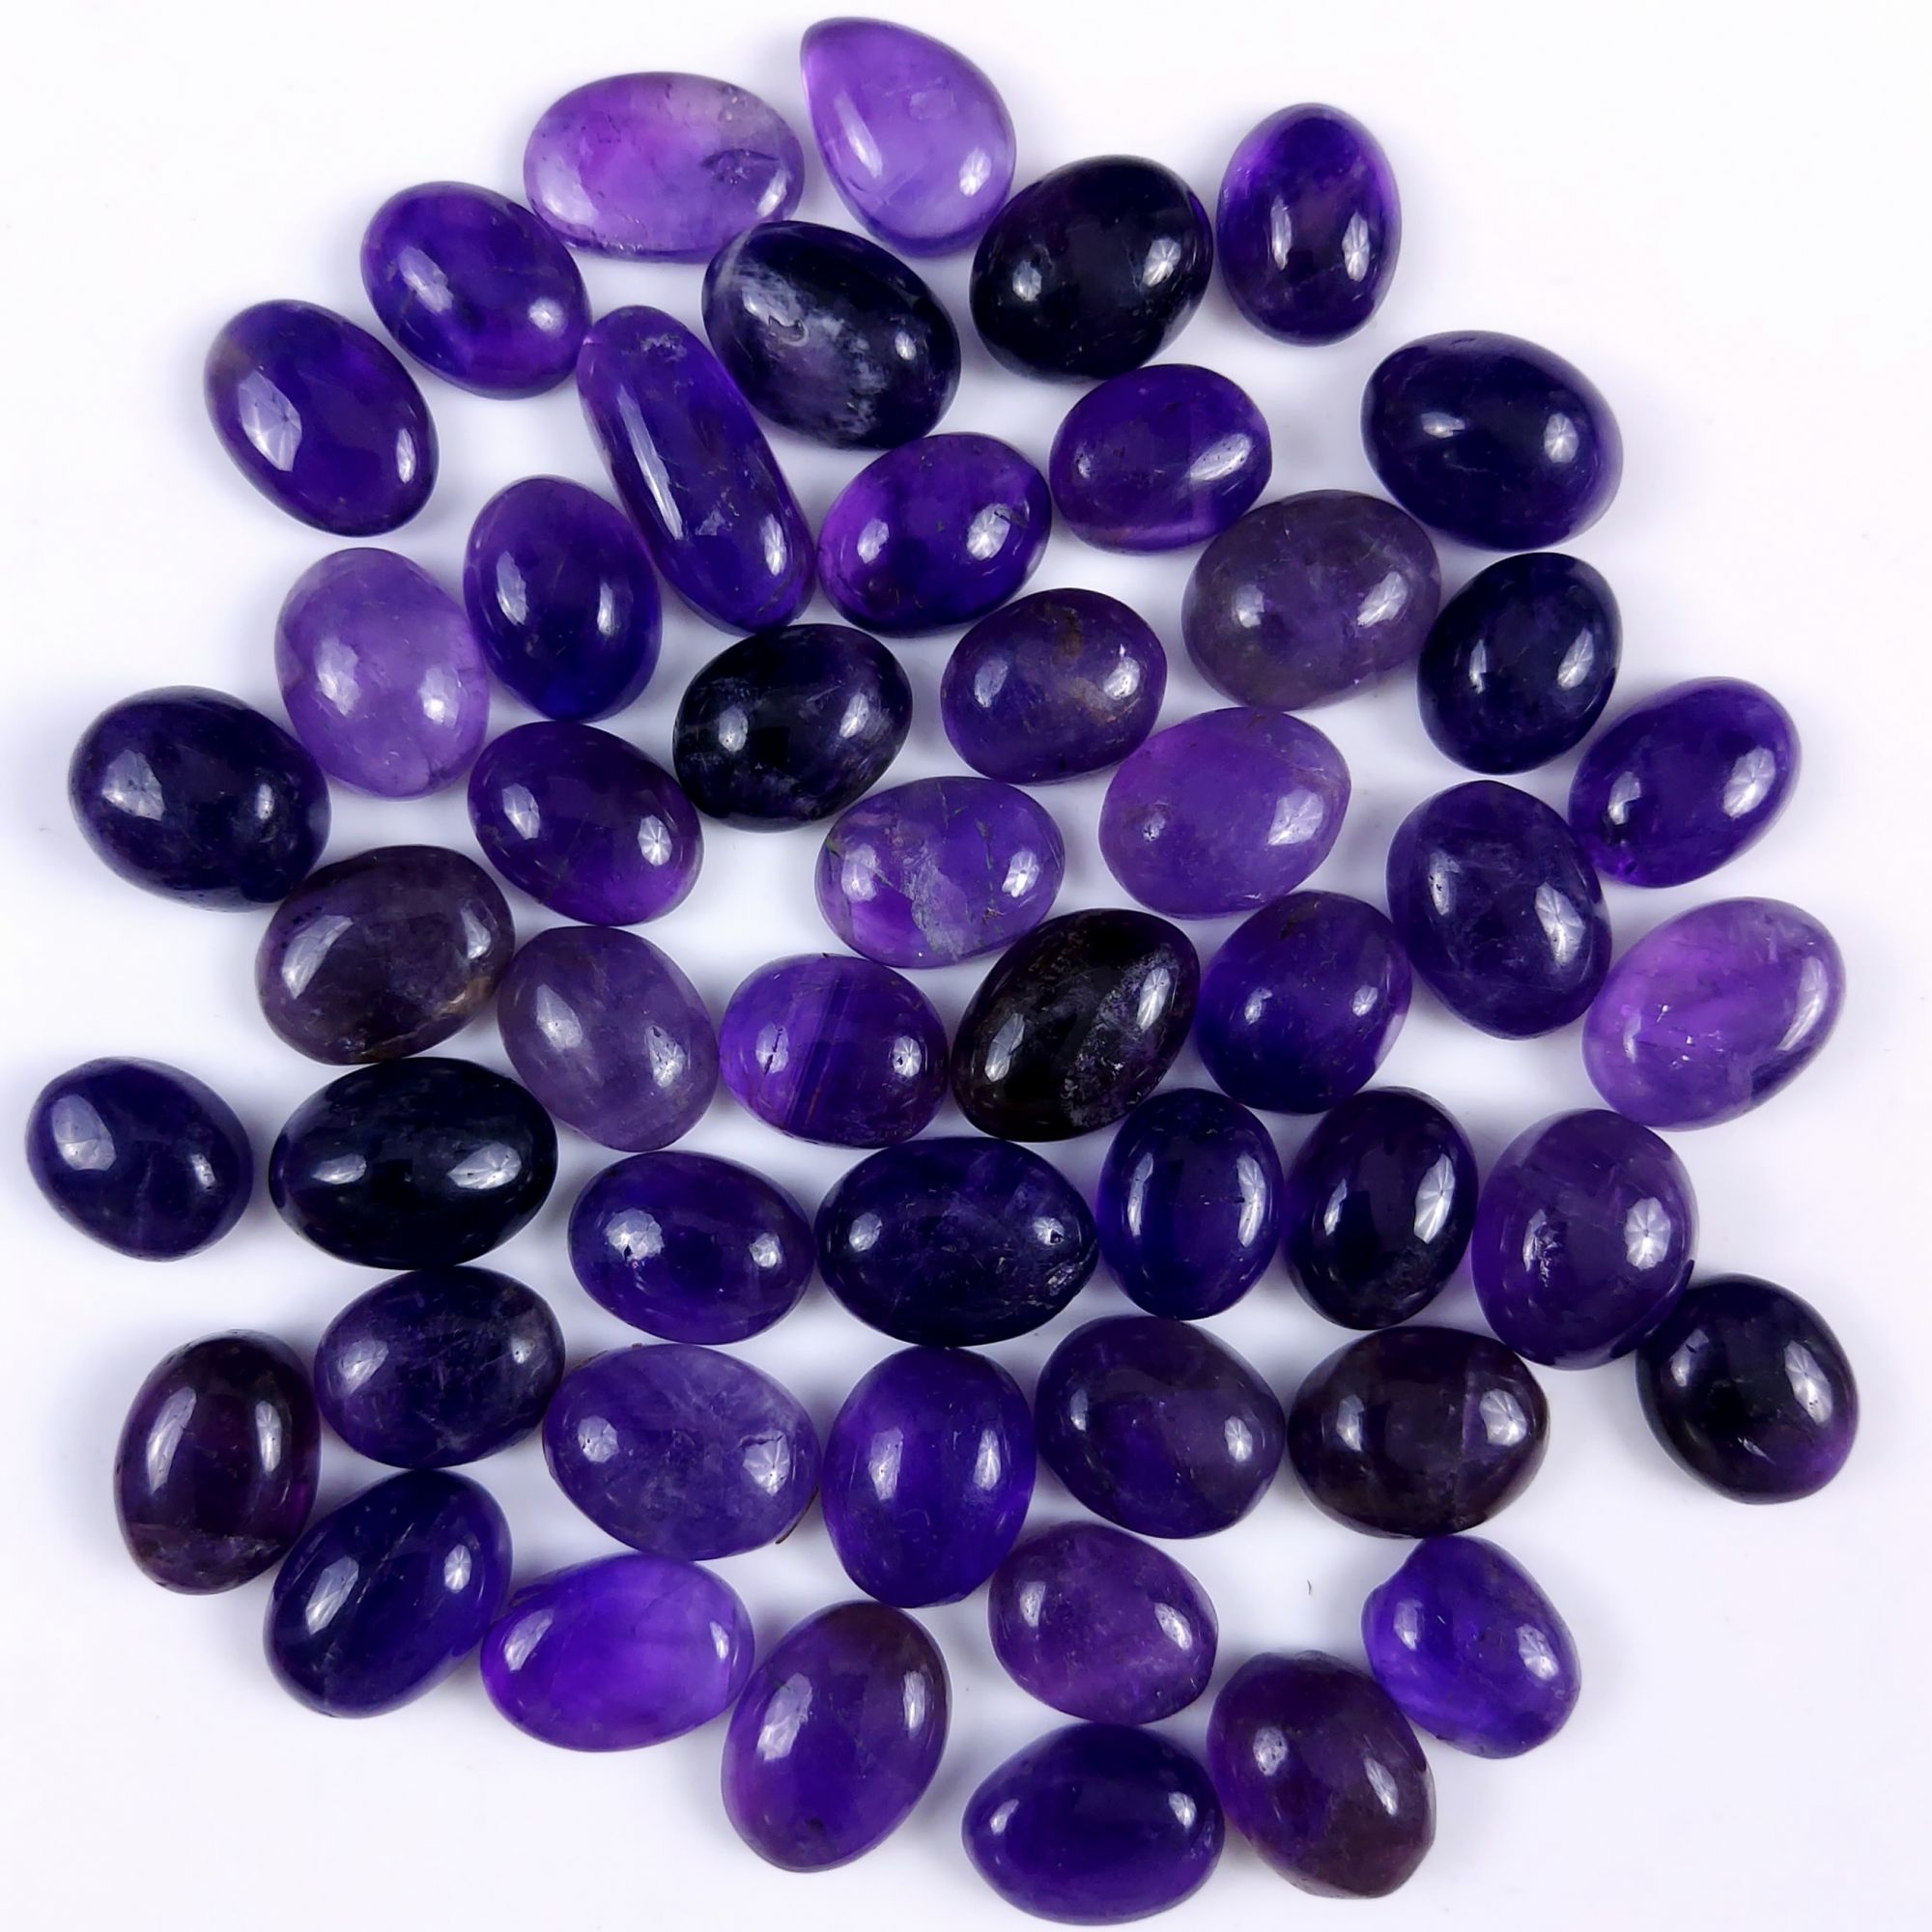 50Pcs Lot 575Cts Natural Purple Amethyst Mix Shape Cabochon Lot  Loose Gemstones Crystal For Jewelry Making  20x7 12x10mm#G-255